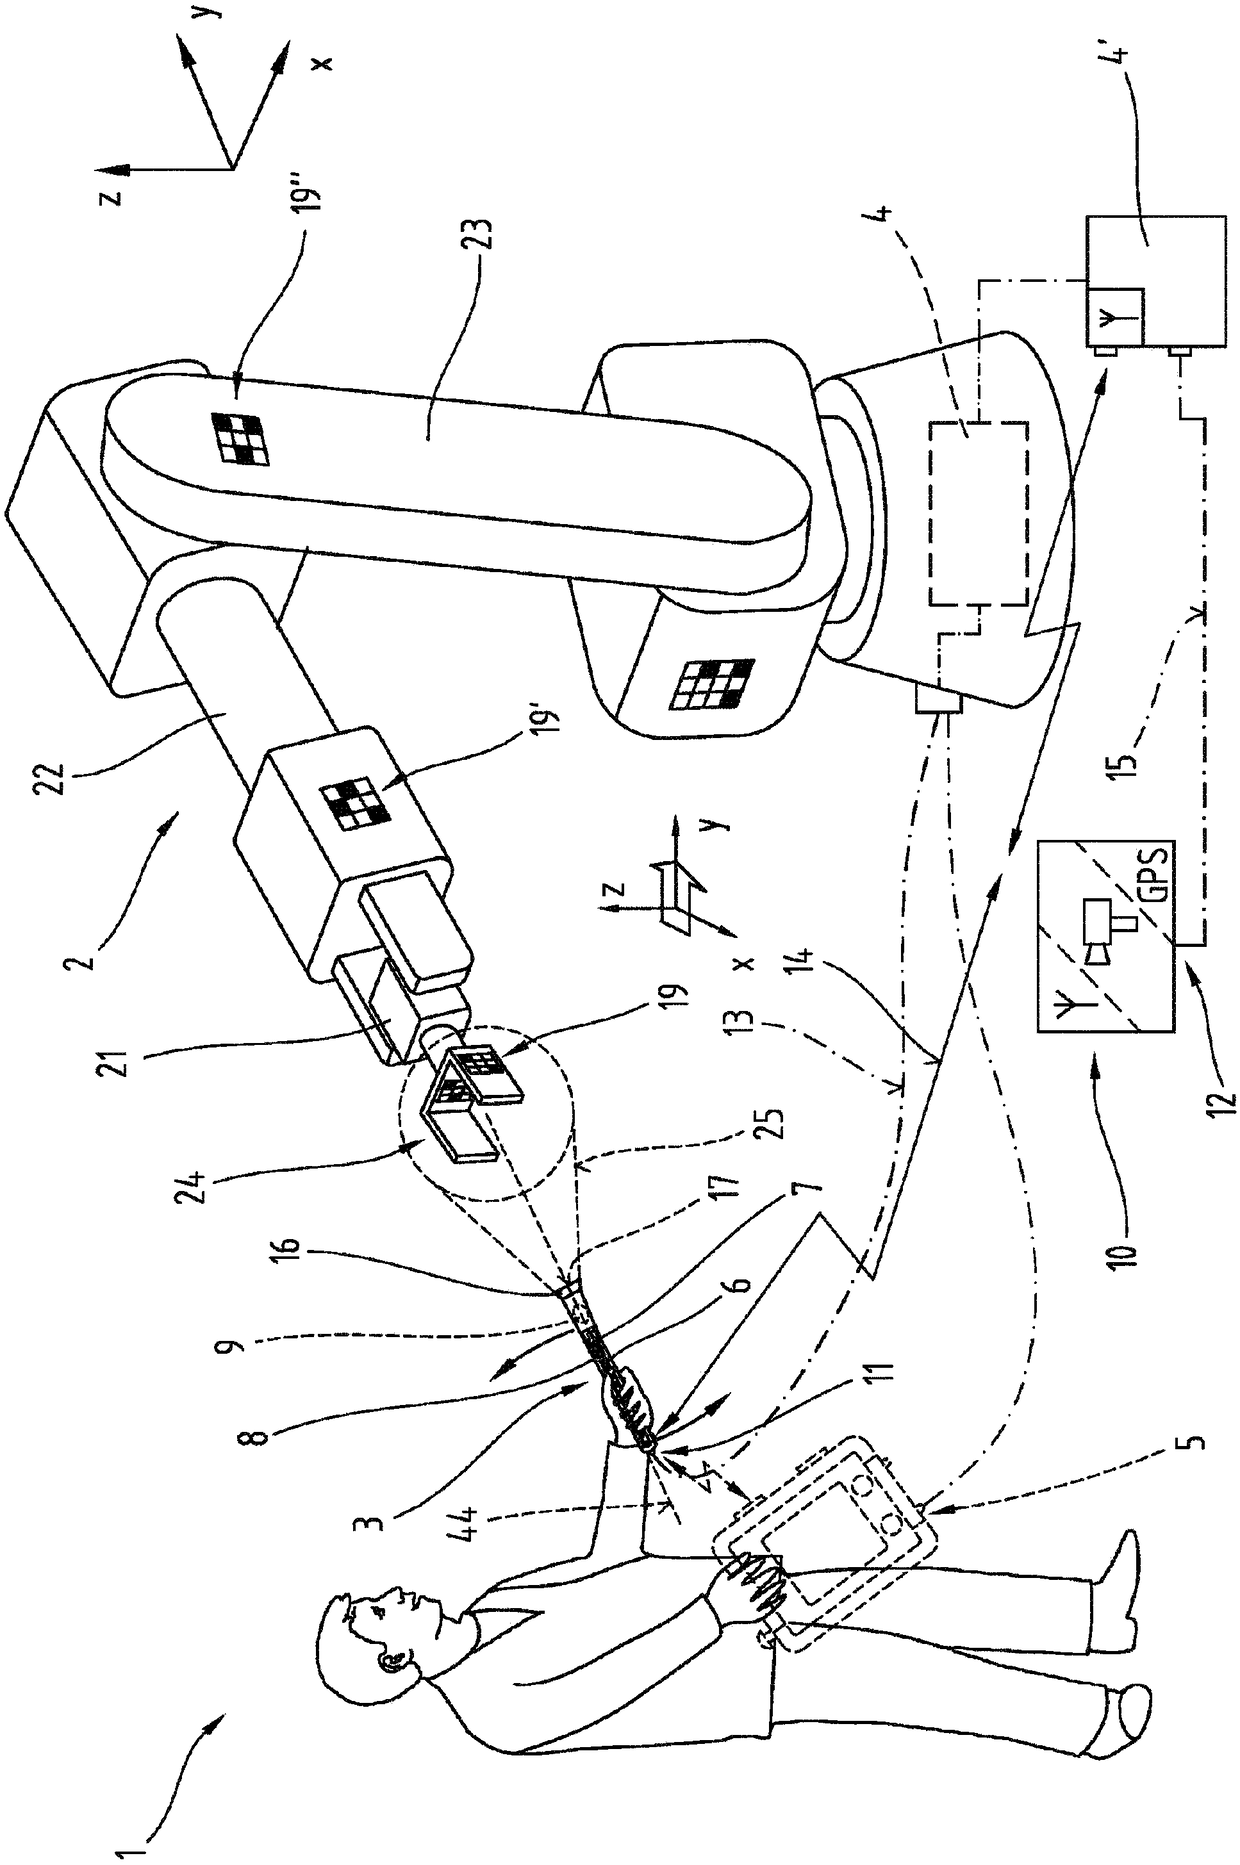 Method, control system, and movement setting means for controlling the movements of articulated arms of an industrial robot